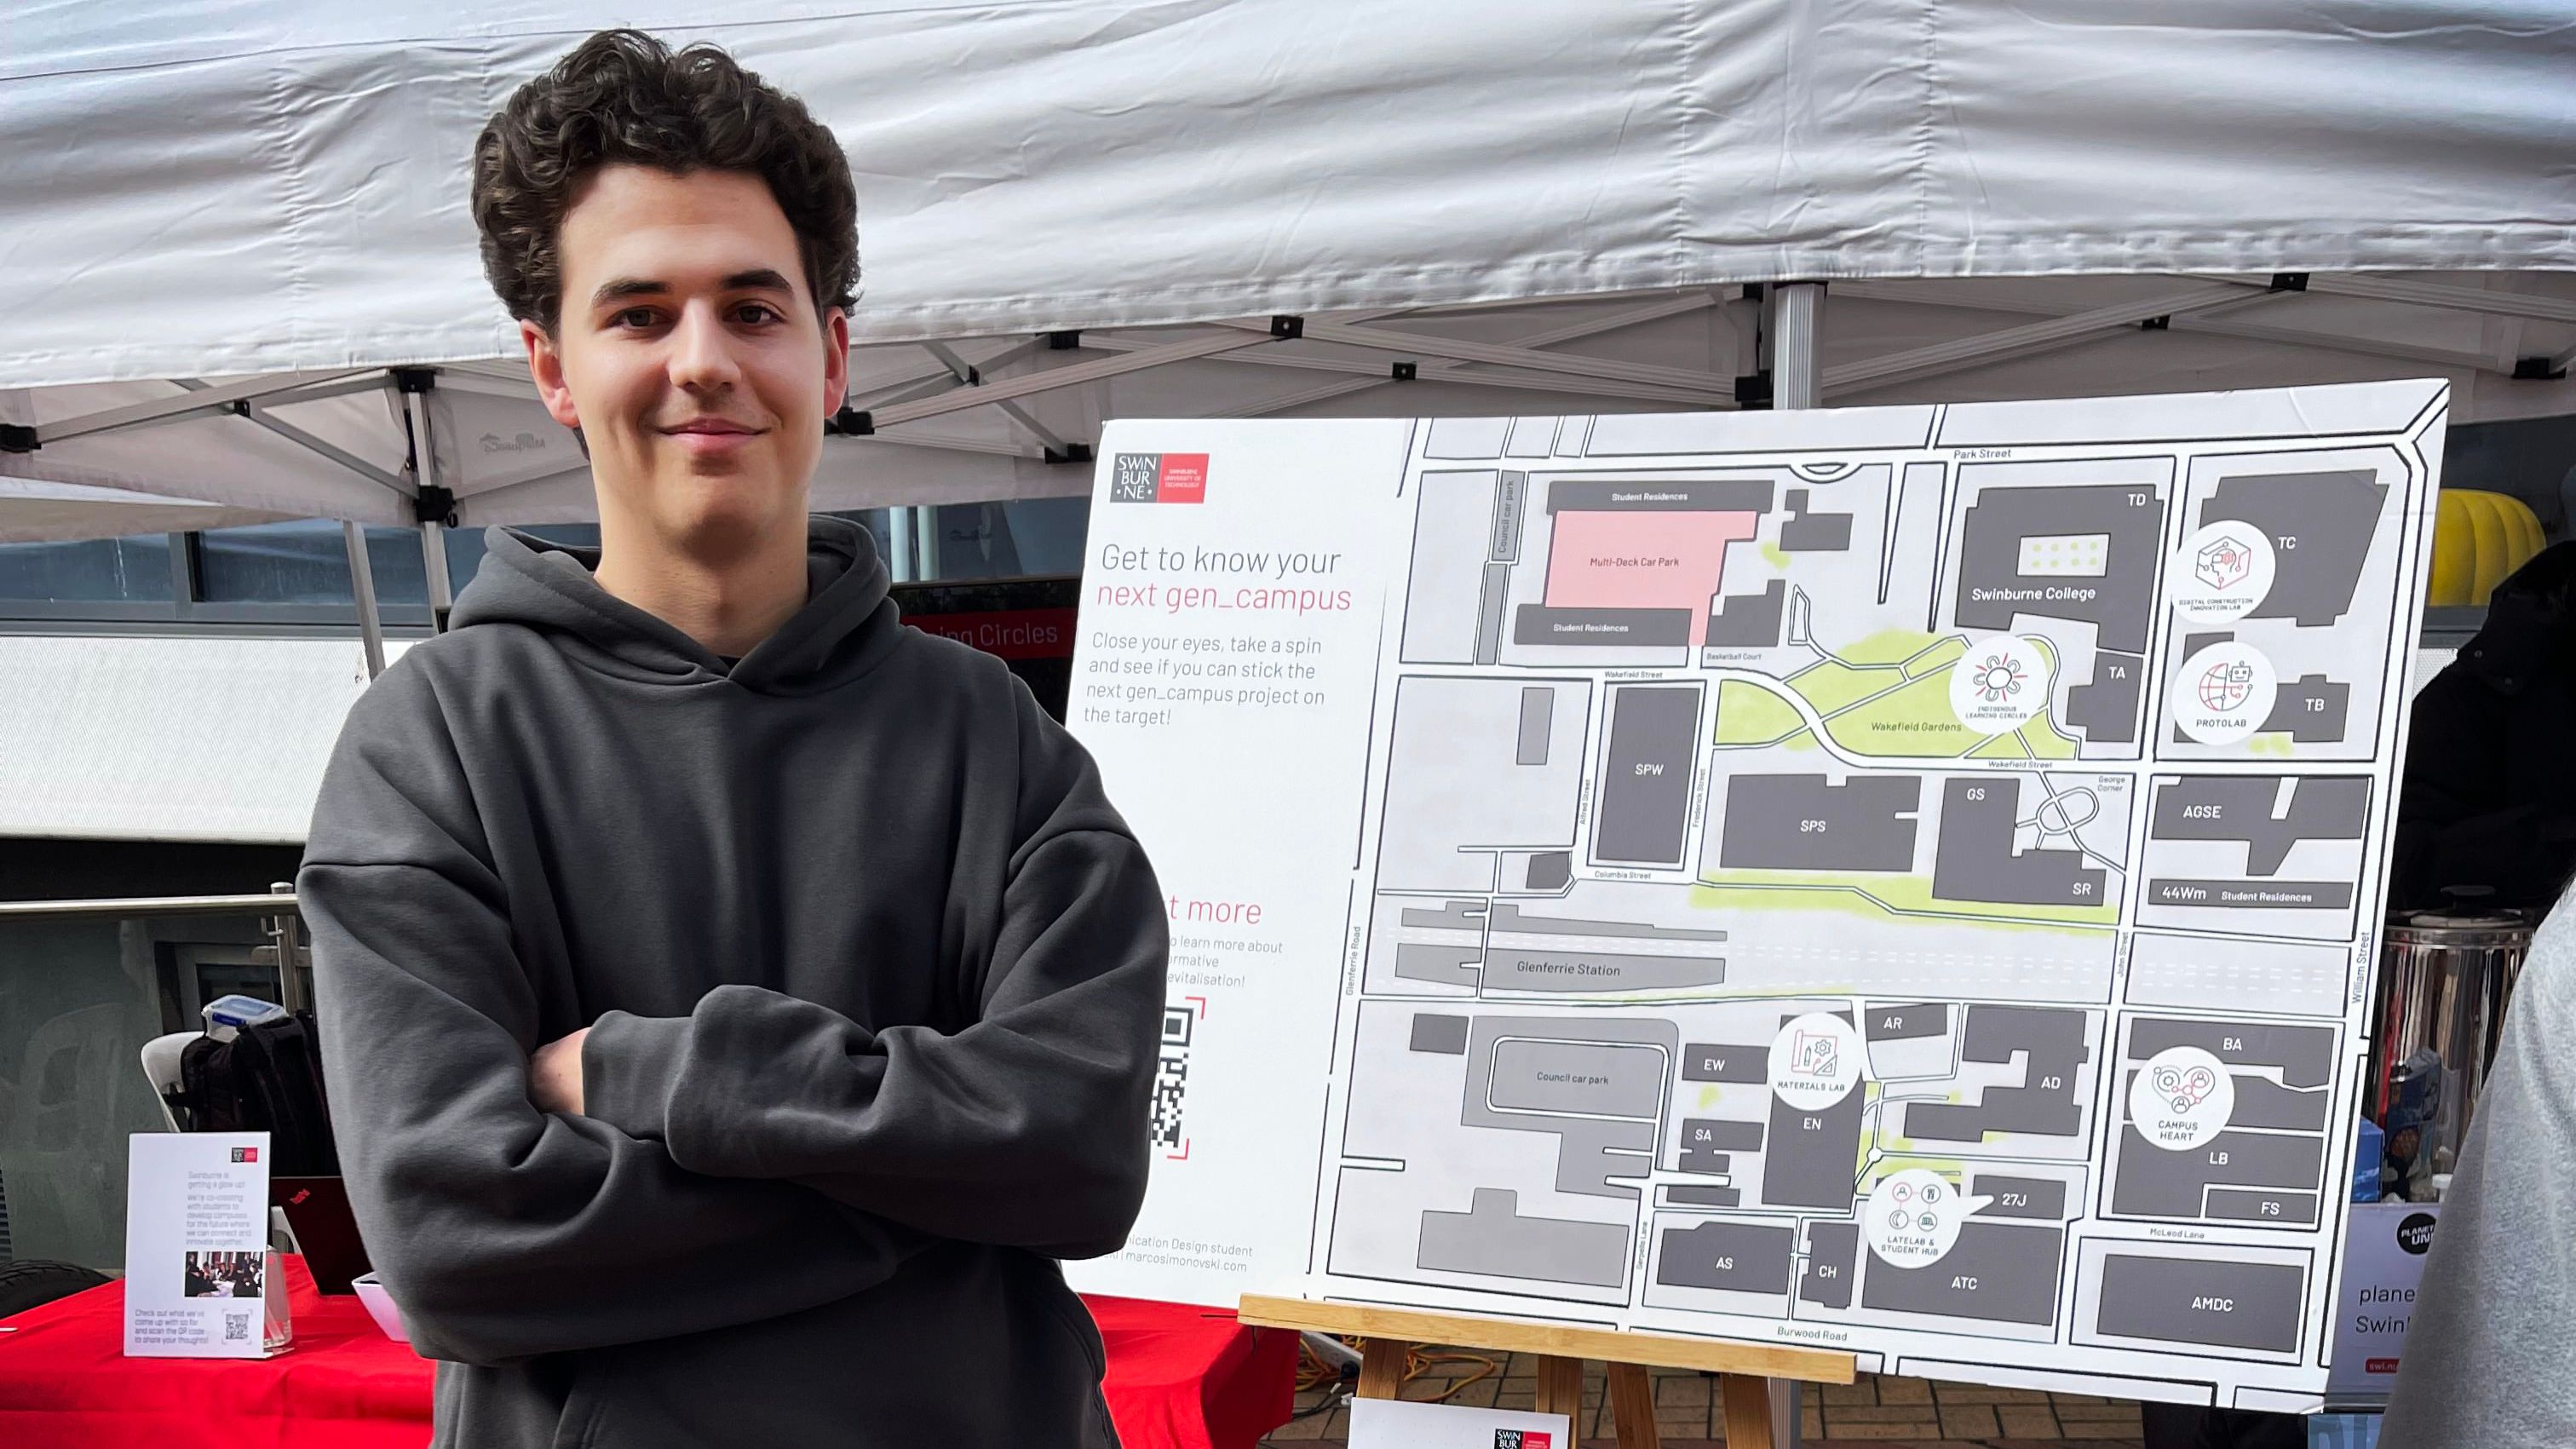 A student with his arms crossed smiles at the camera in front of a map of Swinburne's Hawthorn campus